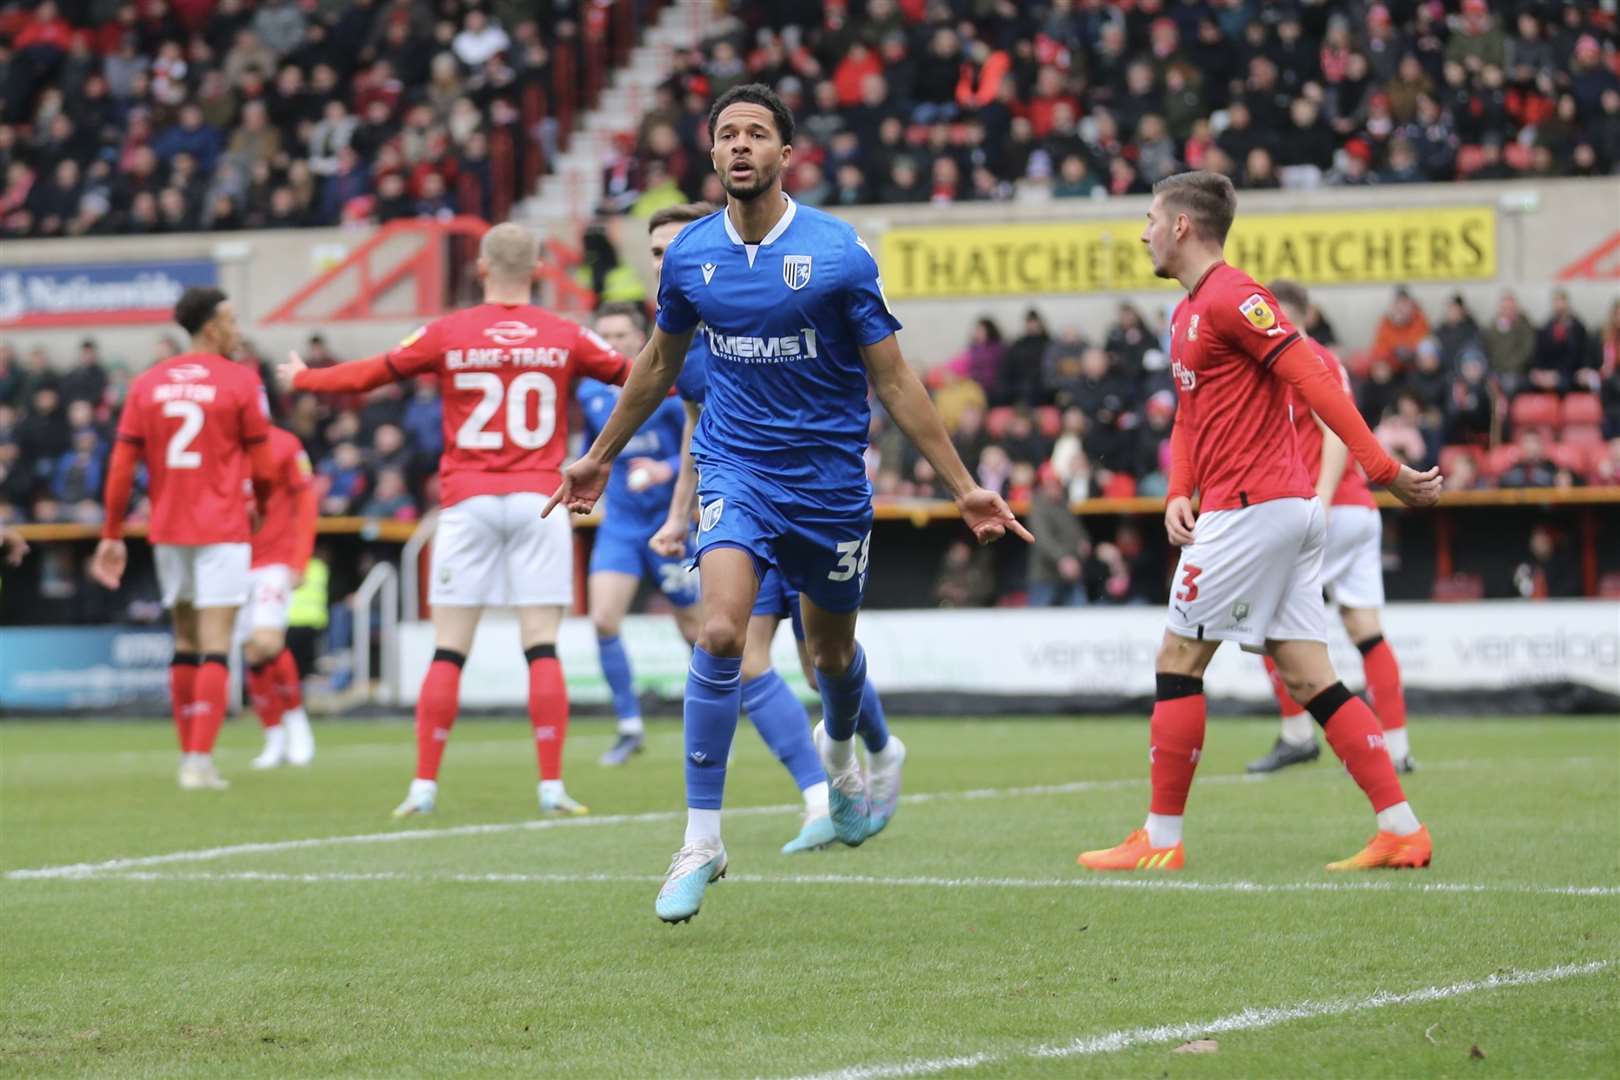 Timothee Dieng celebrates scoring for Gillingham at Swindon but a win against a top side eludes them